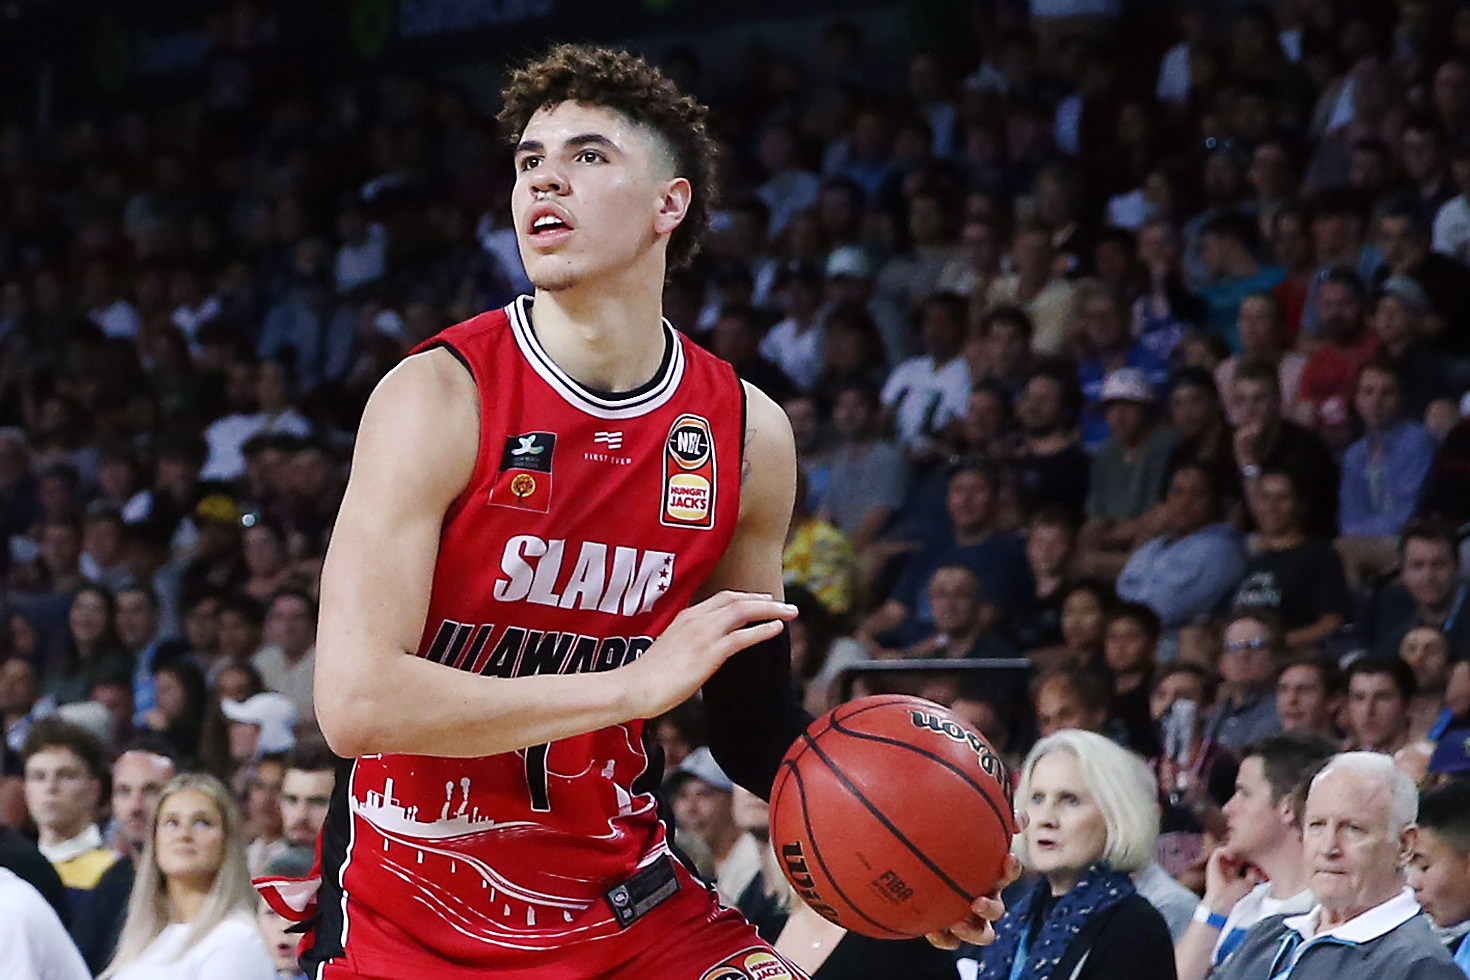 Nba Mock Draft 2020 Expert Predictions For Lamelo Ball And Top Guard Prospects Bleacher Report Latest News Videos And Highlights